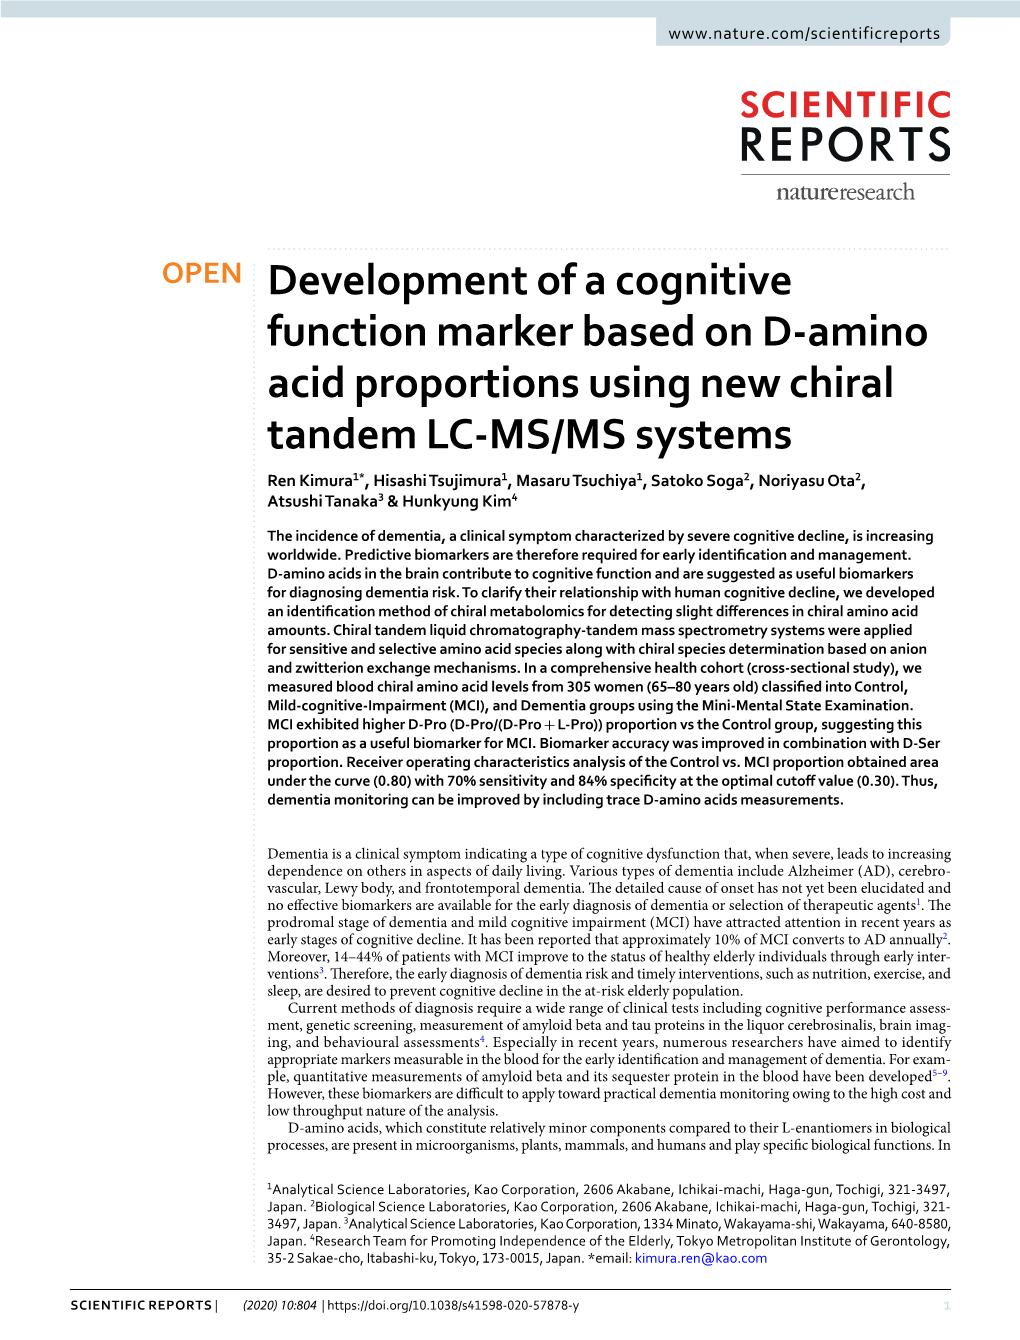 Development of a Cognitive Function Marker Based on D-Amino Acid